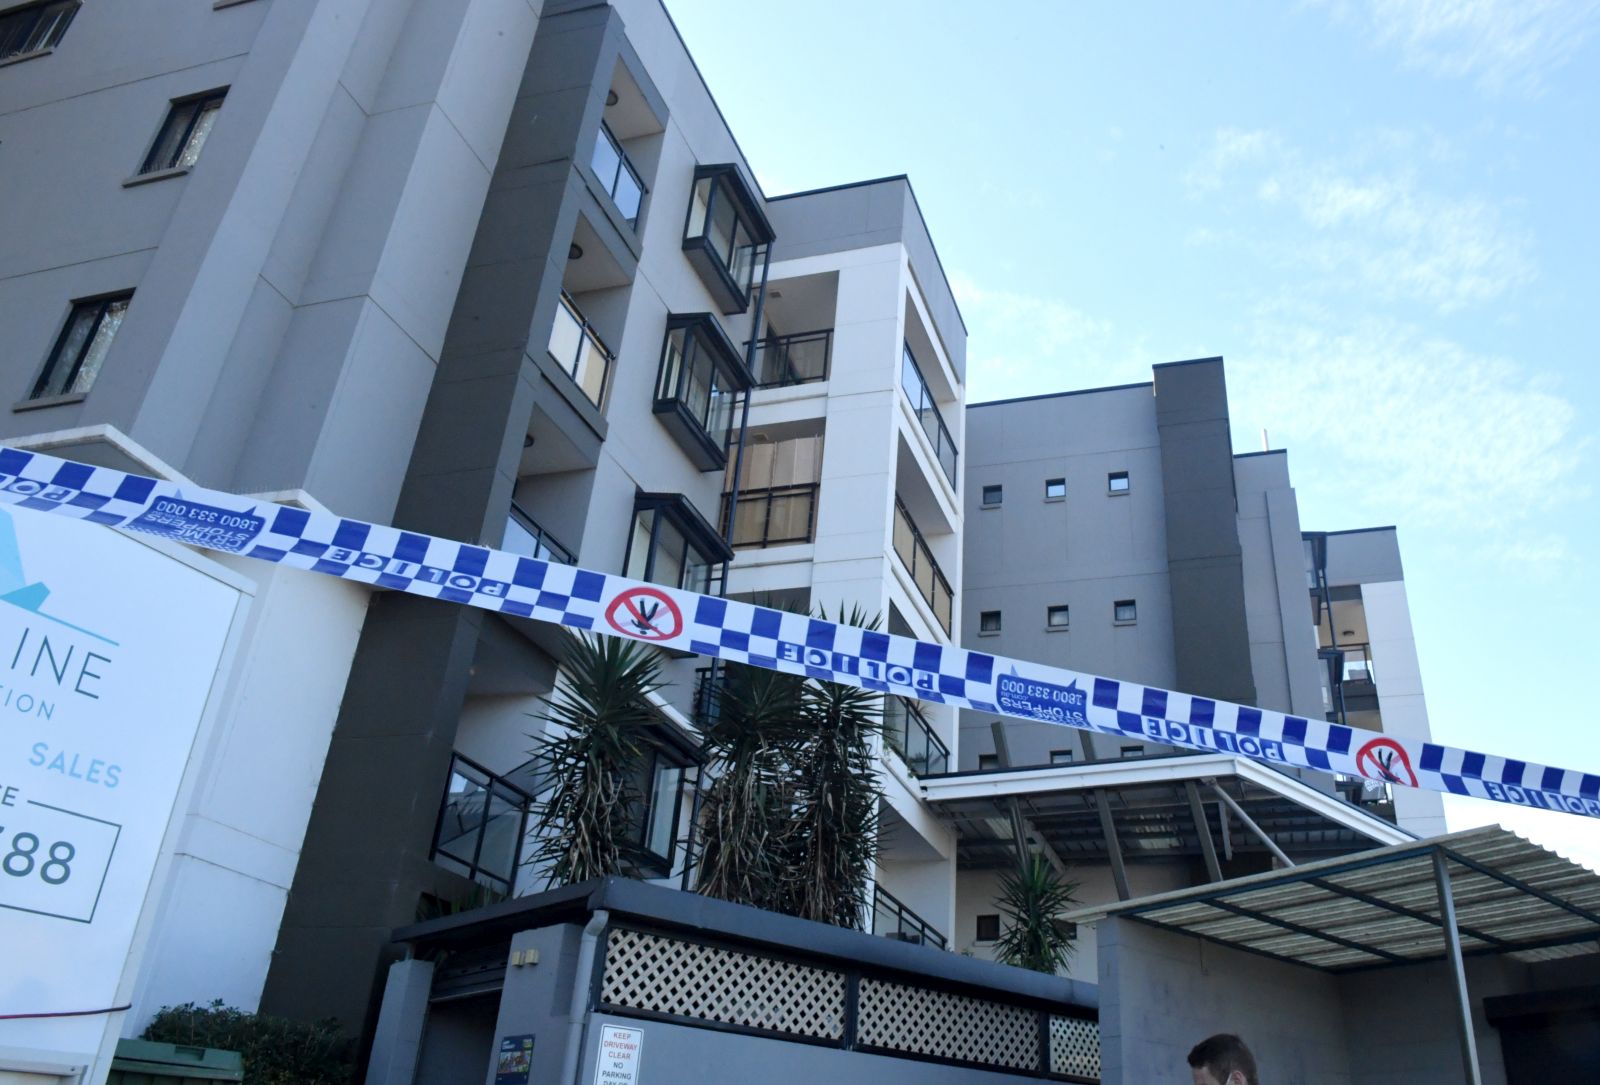 epa09371980 Police tape is seen at an apartment building that was put under lockdown at Devitt Street in the south western suburb of Blacktown in Sydney, Australia, 28 July 2021. NSW police are out guarding an apartment block in Devitt Street, Blacktown whose residents have been placed in isolation overnight. It's understood that health officials discovered several COVID-19 cases inside the building were linked, with fears that a super-spreading event may have occurred.  EPA/MICK TSIKAS  AUSTRALIA AND NEW ZEALAND OUT